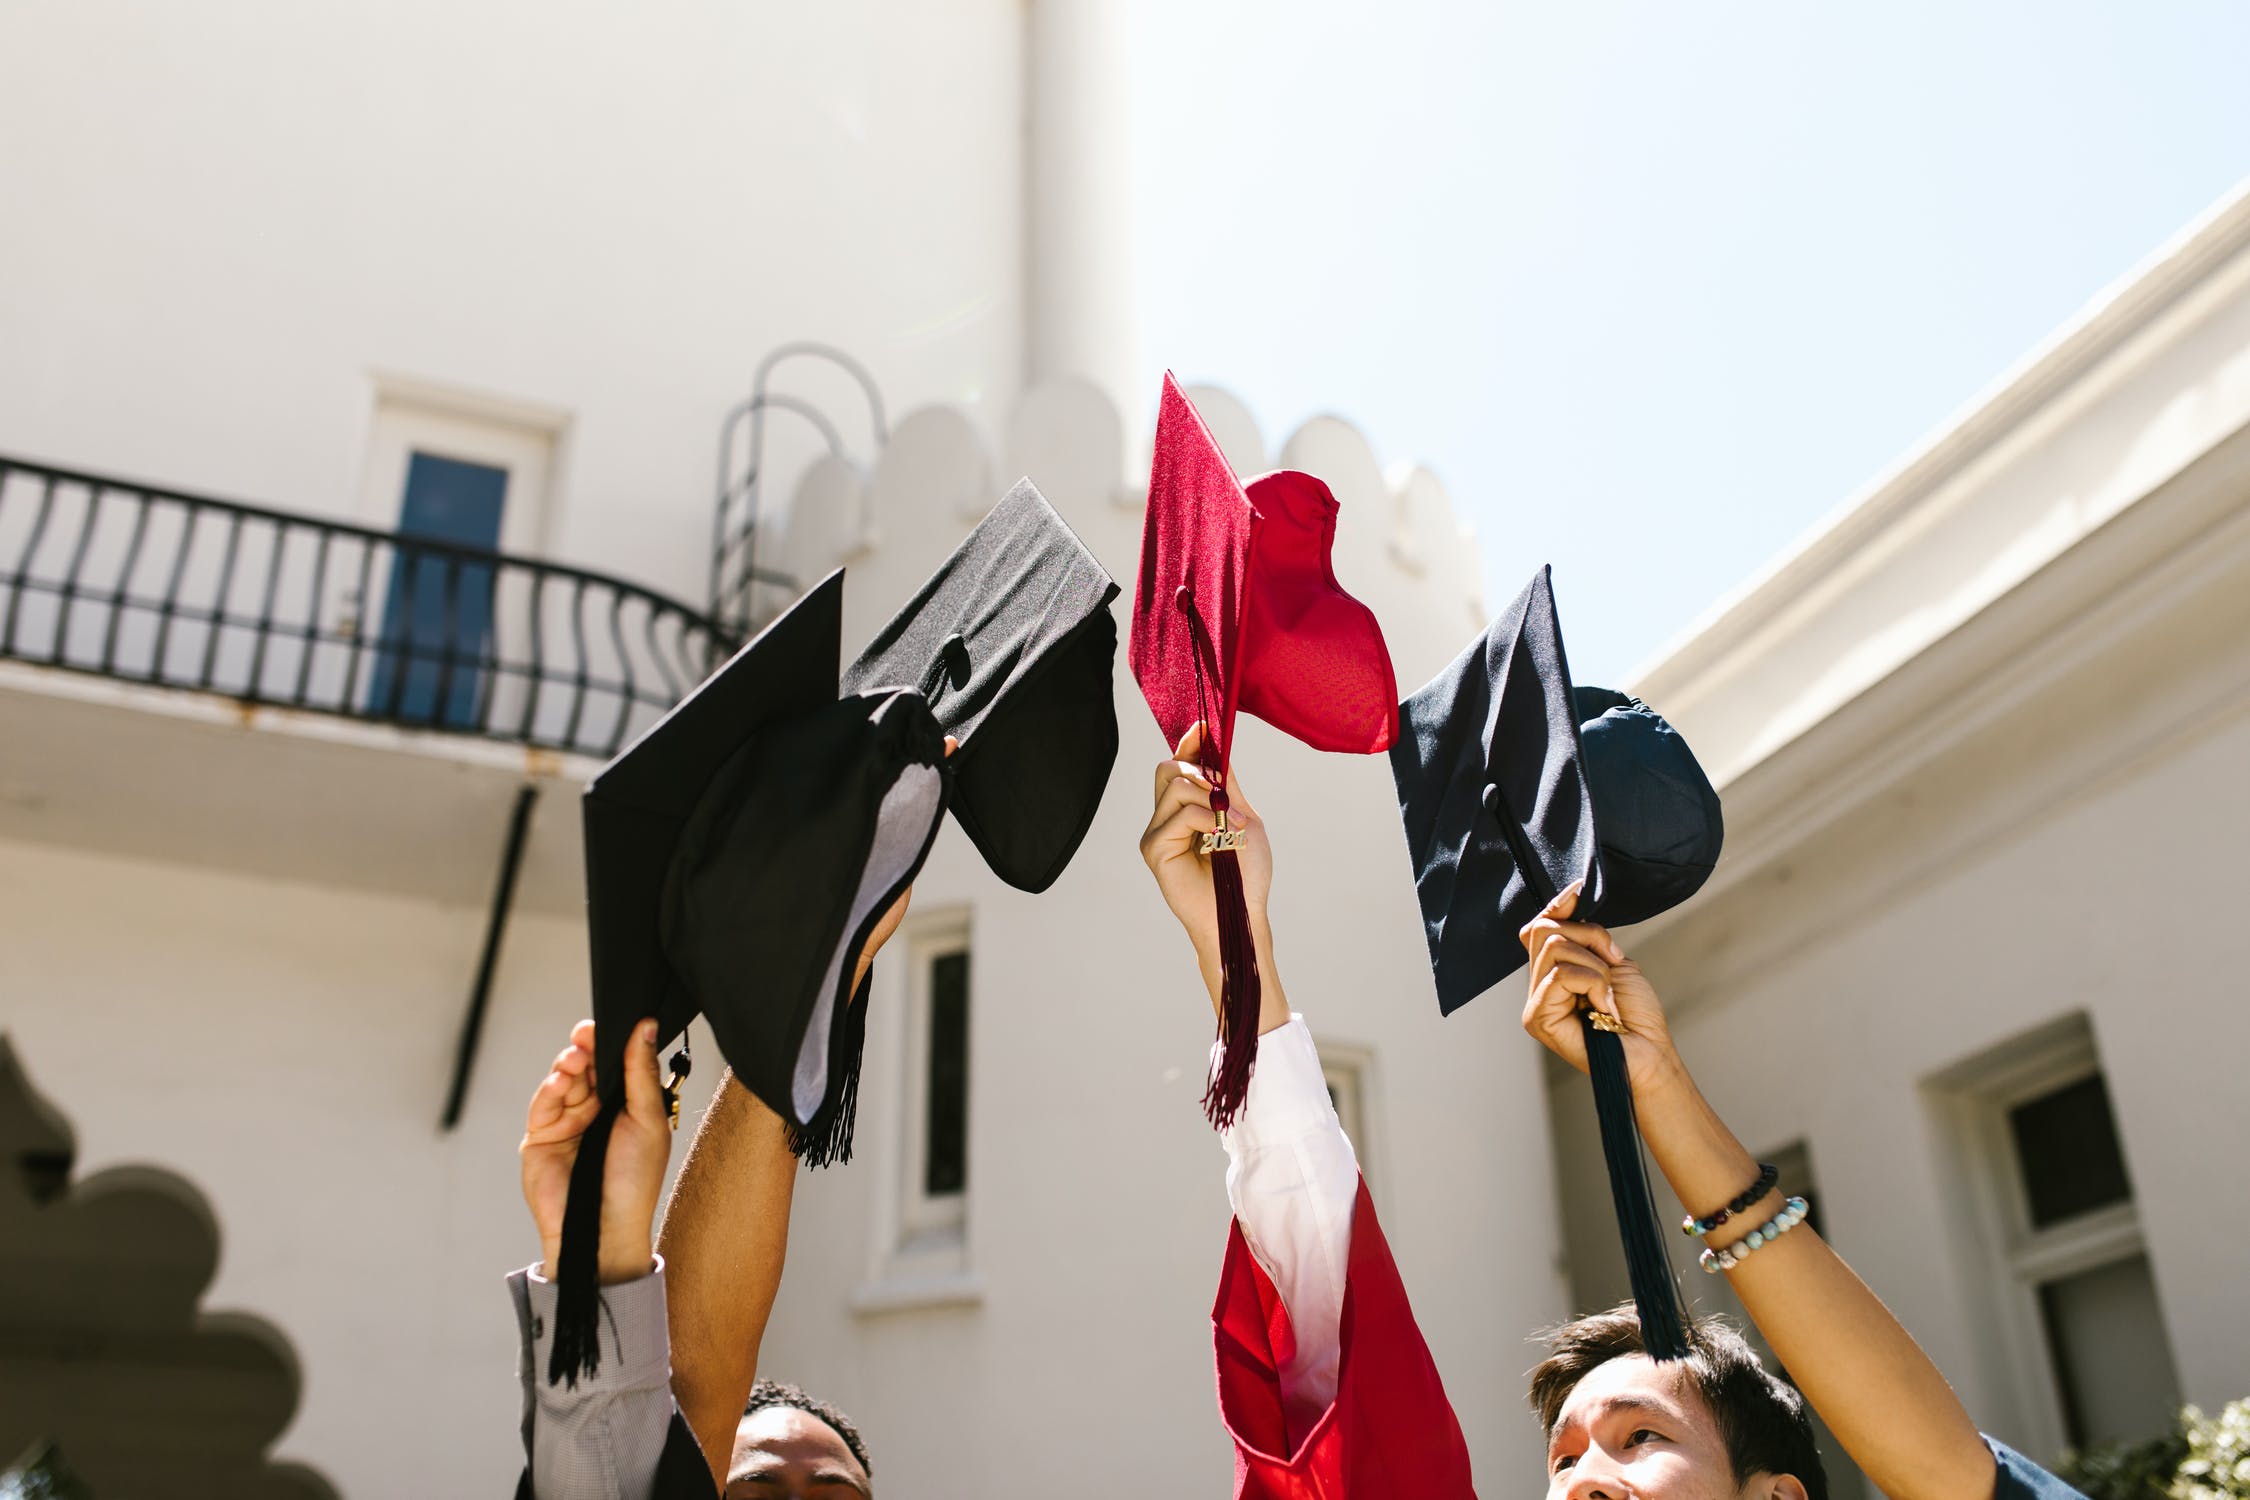 Thanks to that old book, Steven graduated from high school as valedictorian | Source: Unsplash